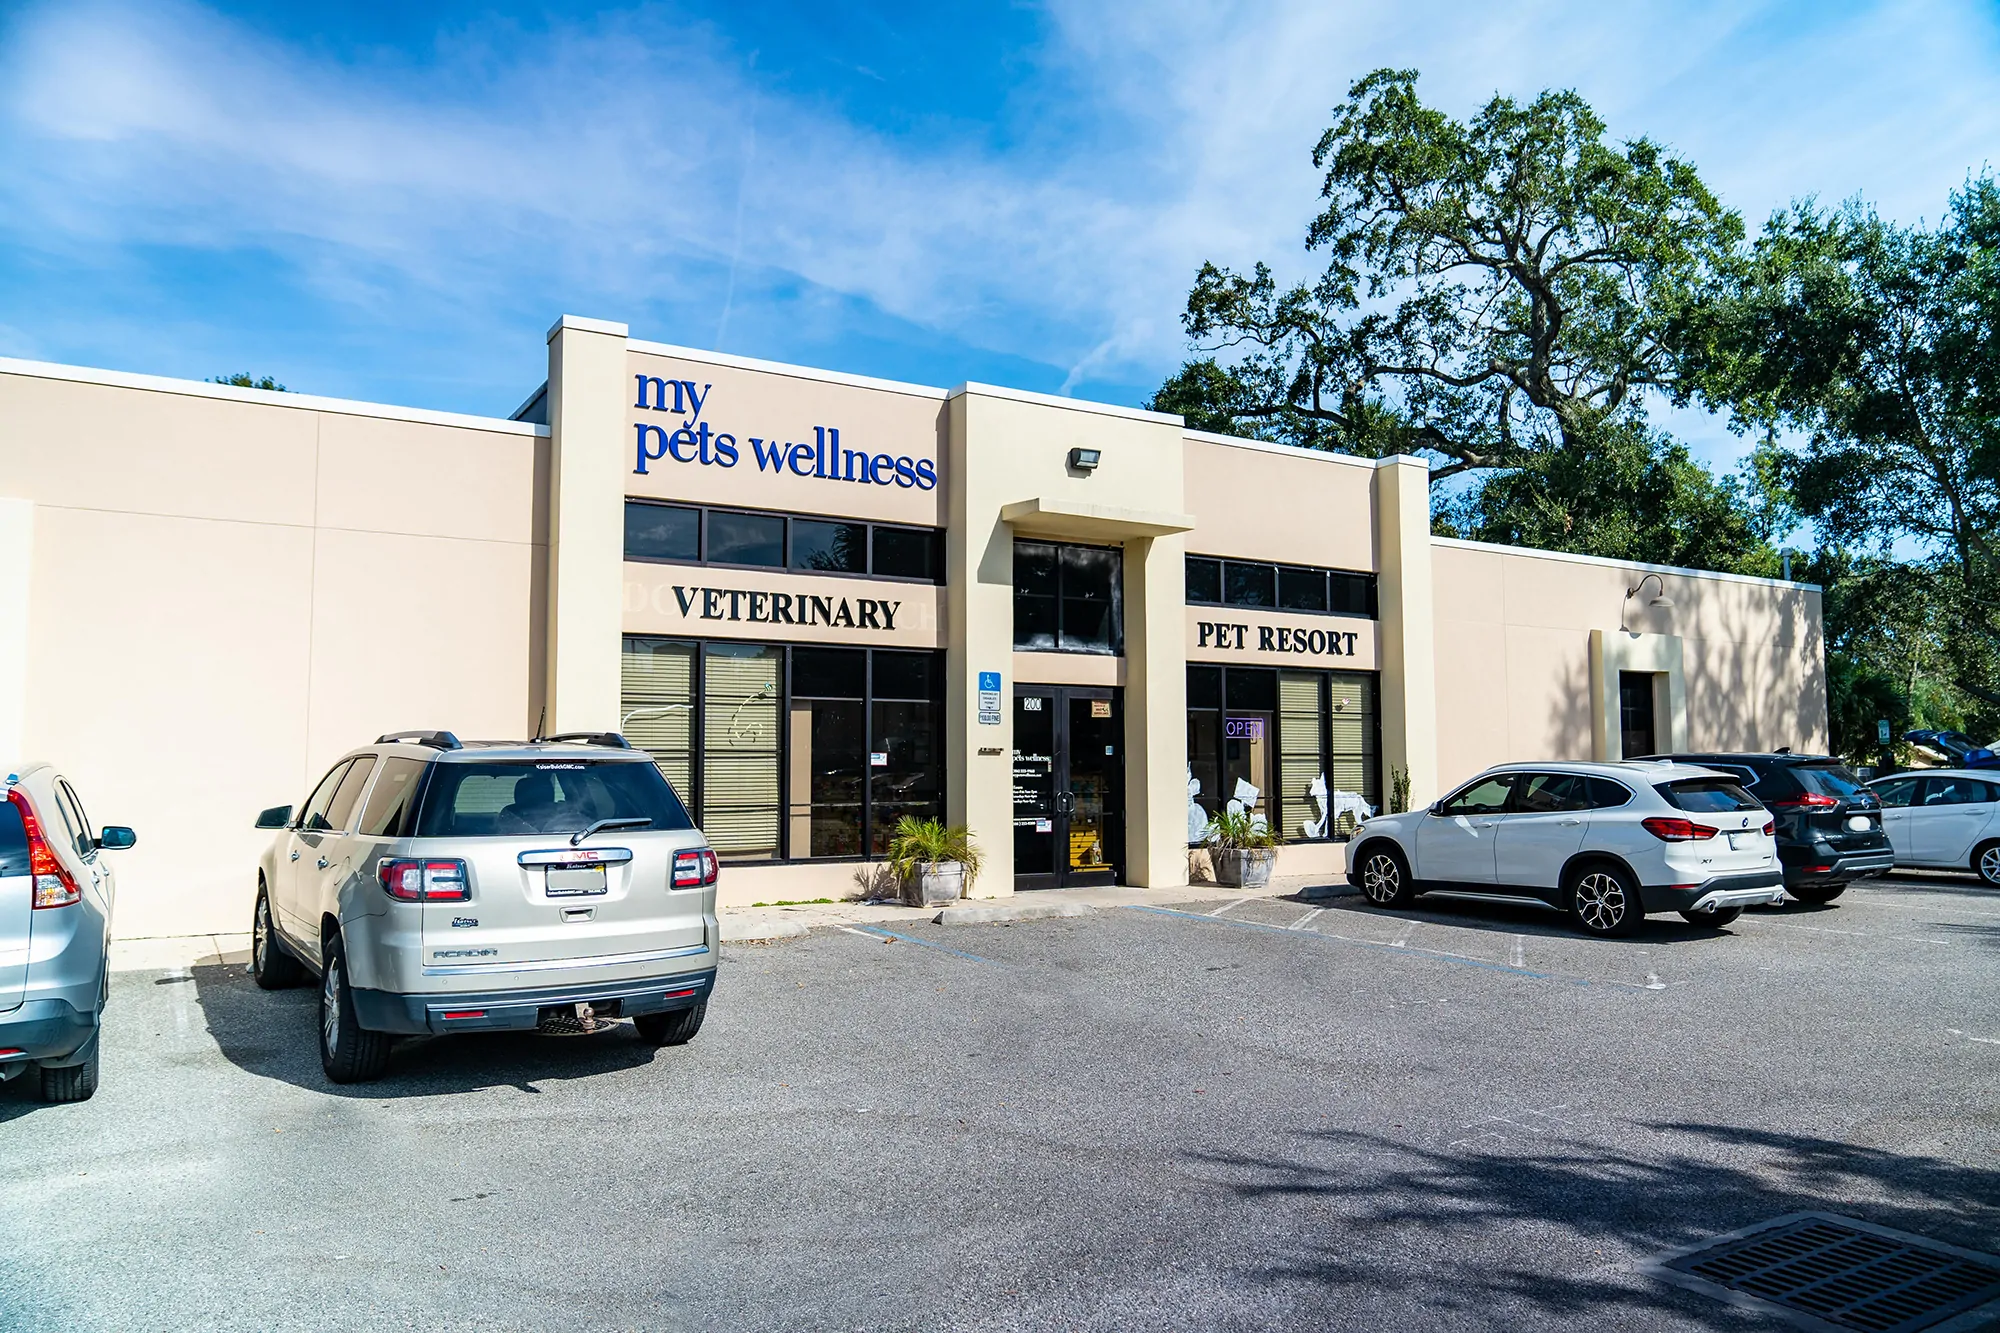 exterior photo of the my pets wellness vet clinic building and parking lot